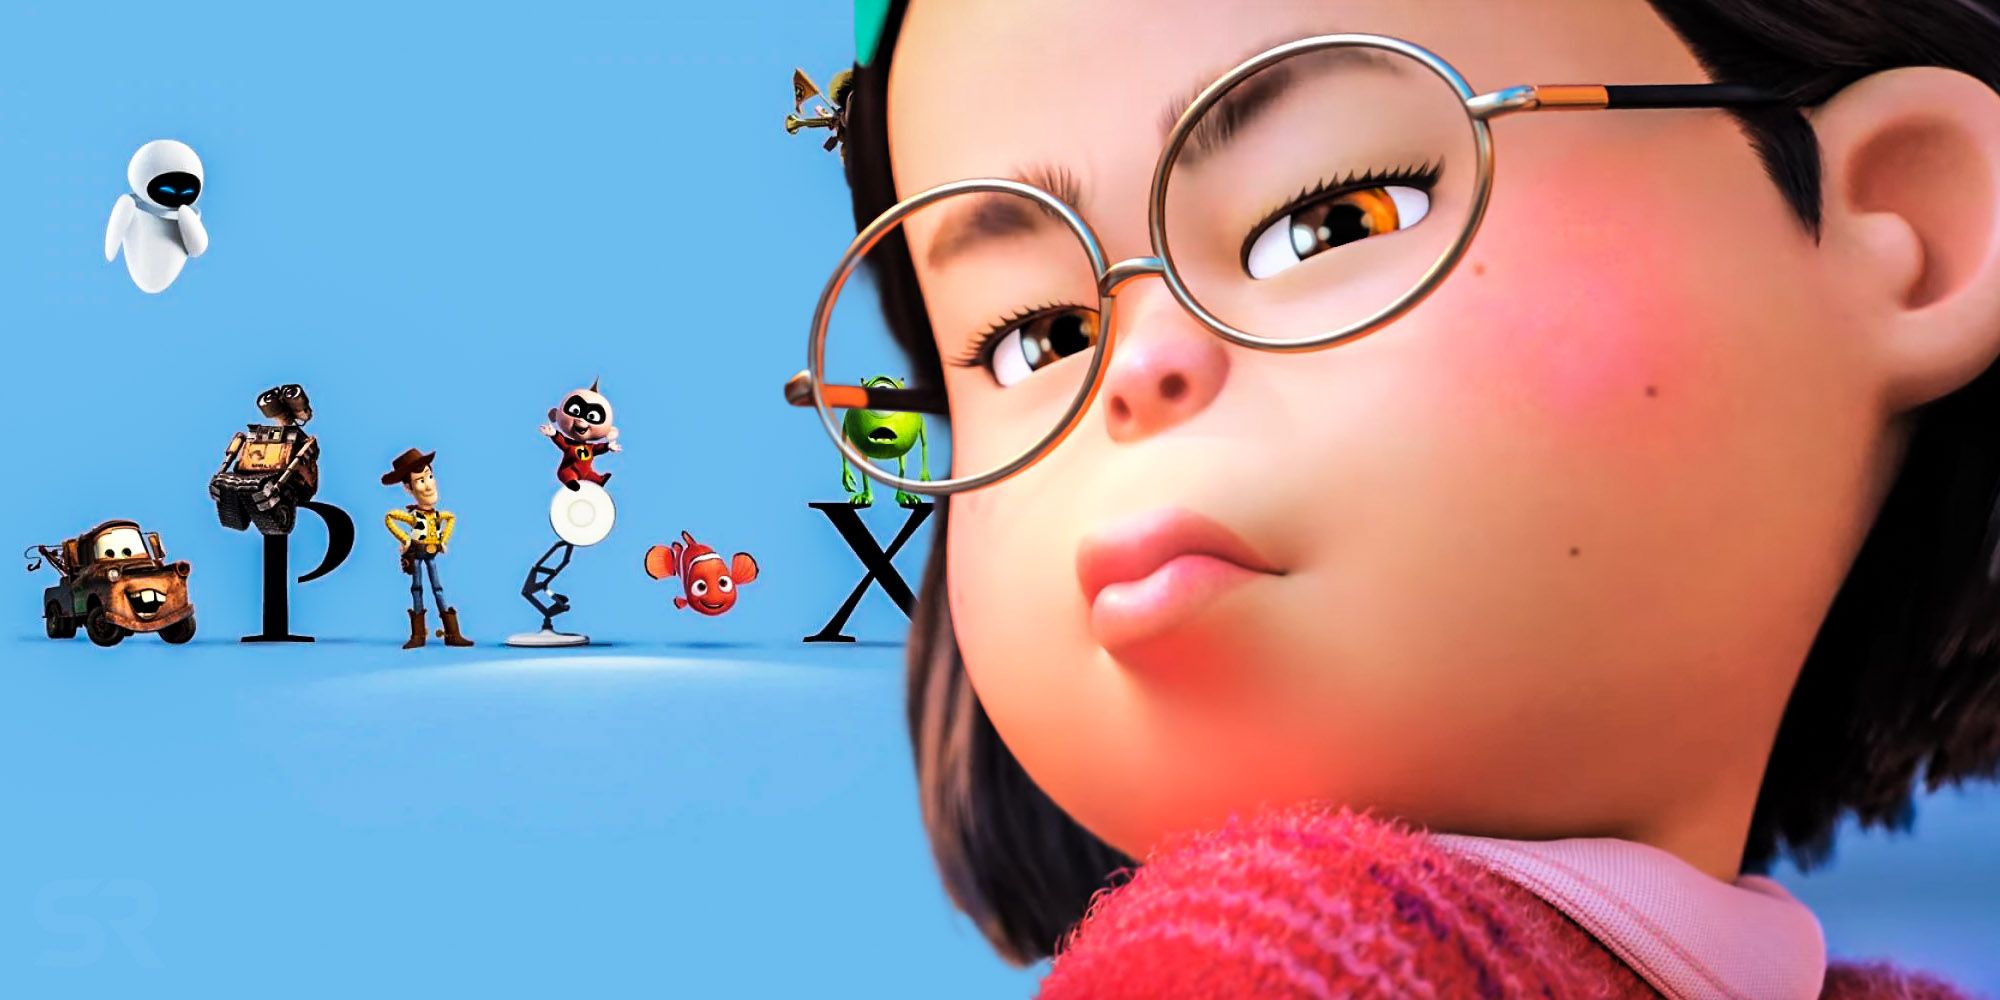 Why Turning Red Looks So Different To Other Pixar Movies